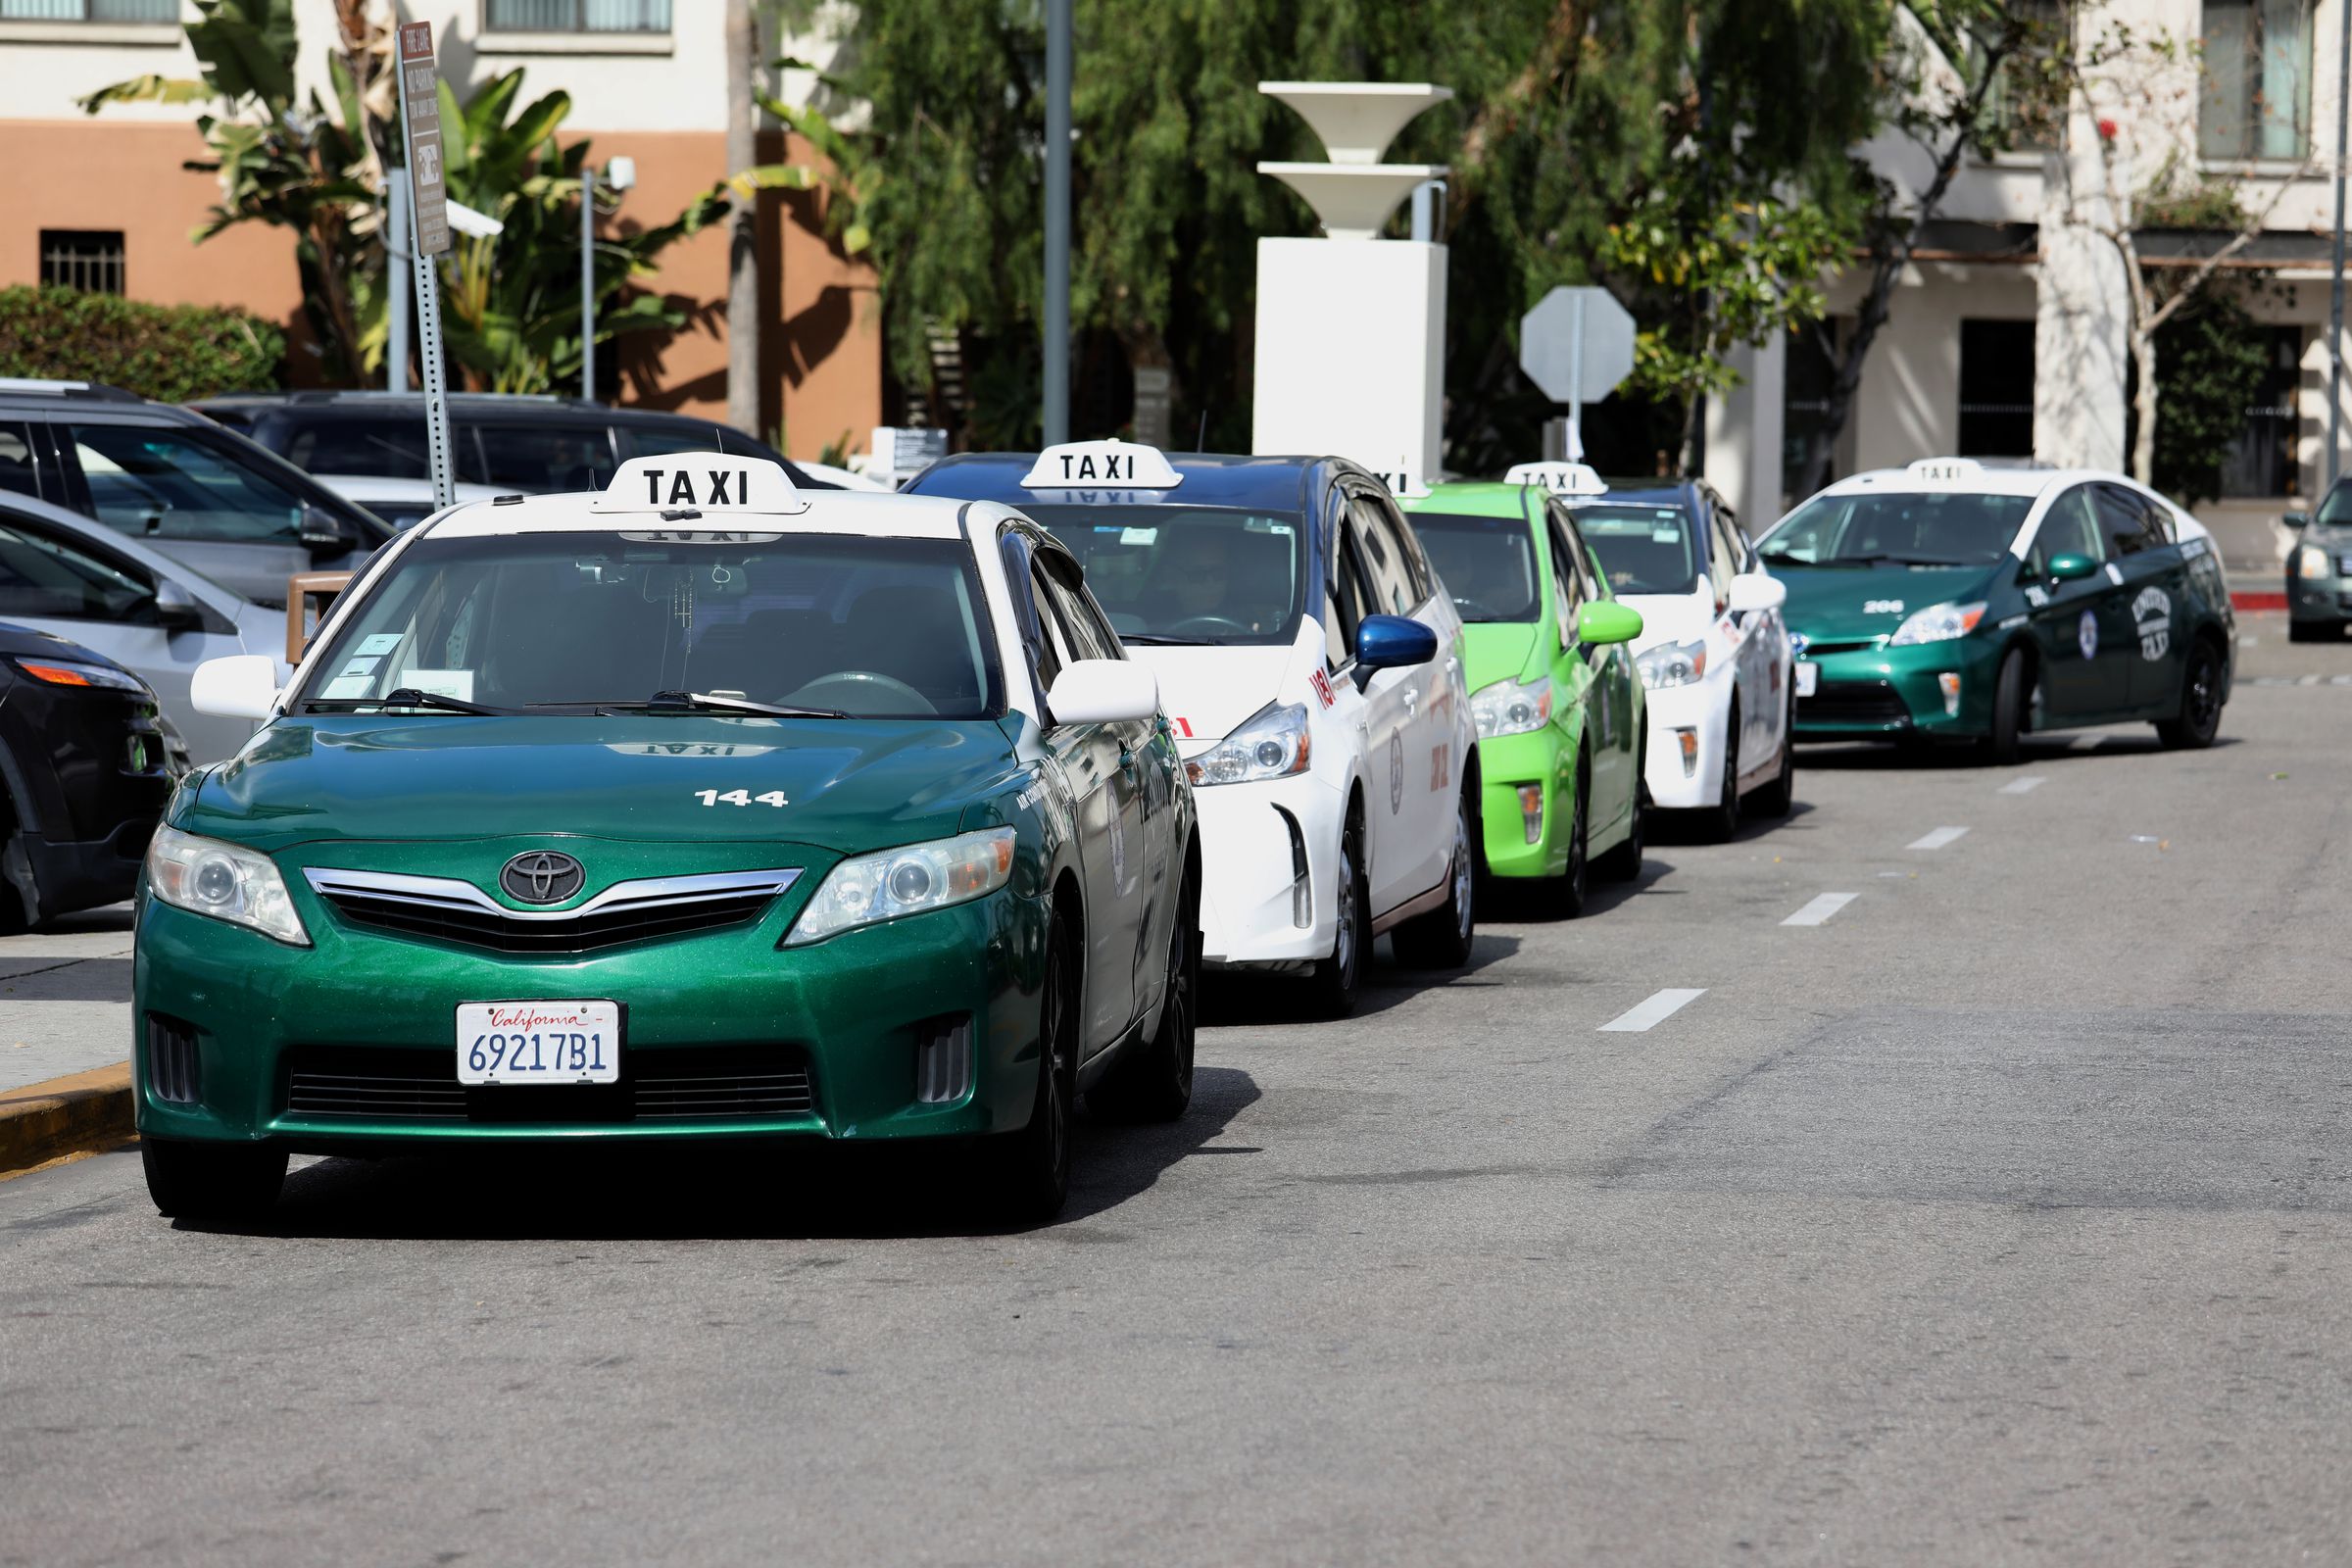 The Los Angeles City Council is expected to vote Tuesday to overhaul a decades-old taxi permitting system and introduce ridehailing apps to compete with Uber and Lyft